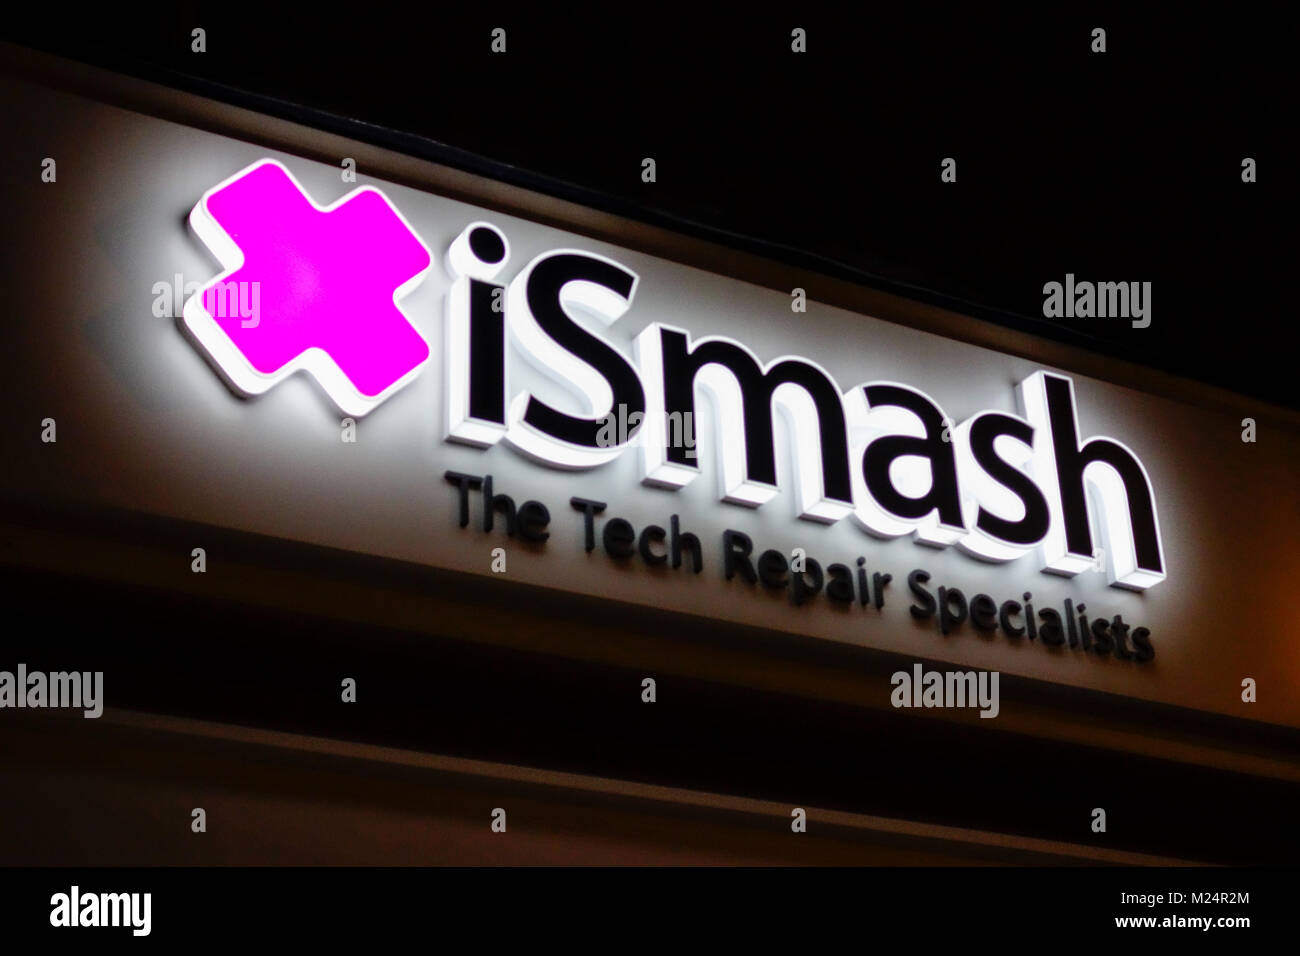 iSmash the tech repair specialists Stock Photo